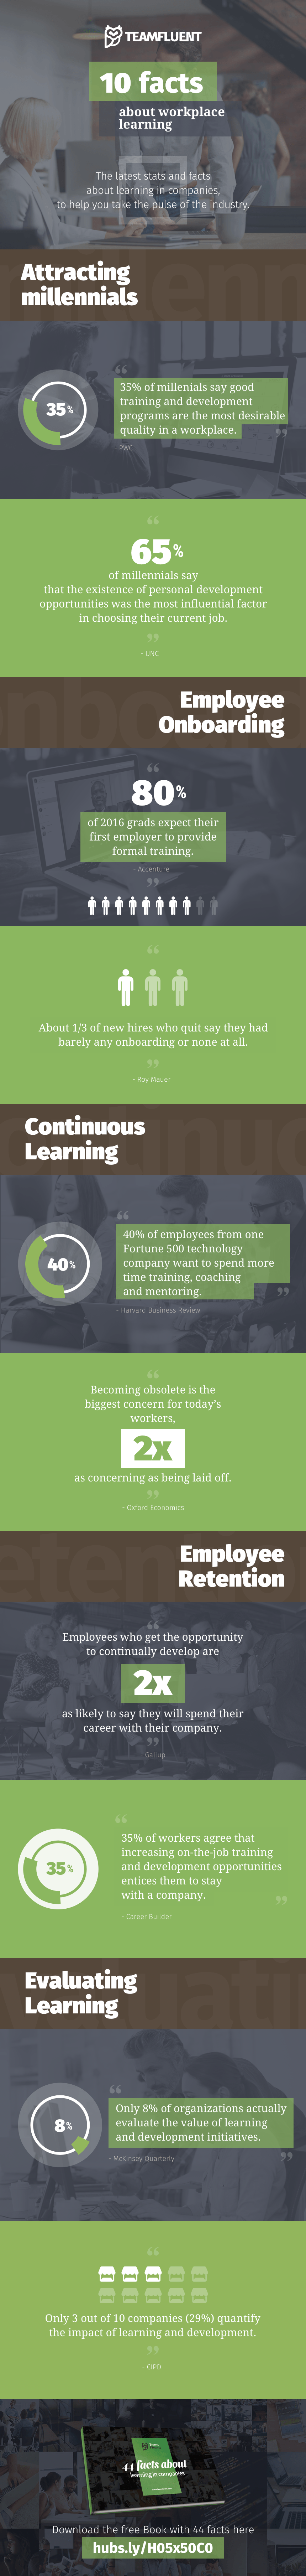 10 Interesting Workplace Learning Facts Infographic